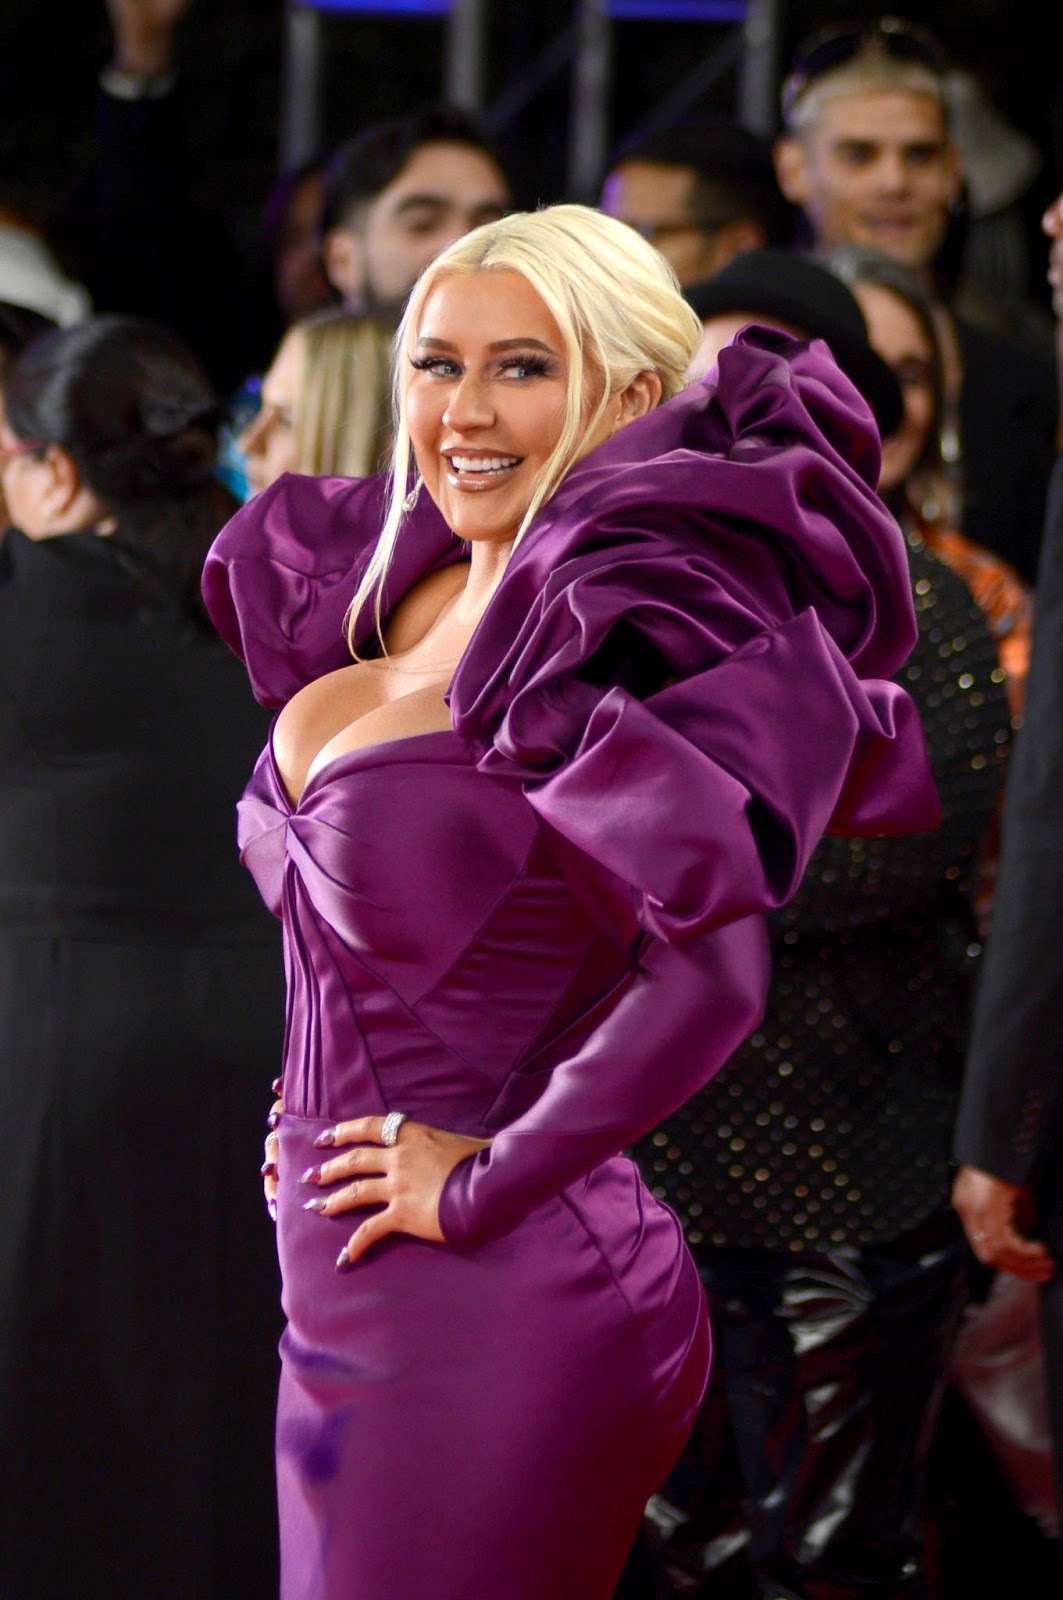 Christina Aguilera In Purple Gown With Dramatic Ruffled Collar & Invisible Heels at Latin Grammy Awards 2022